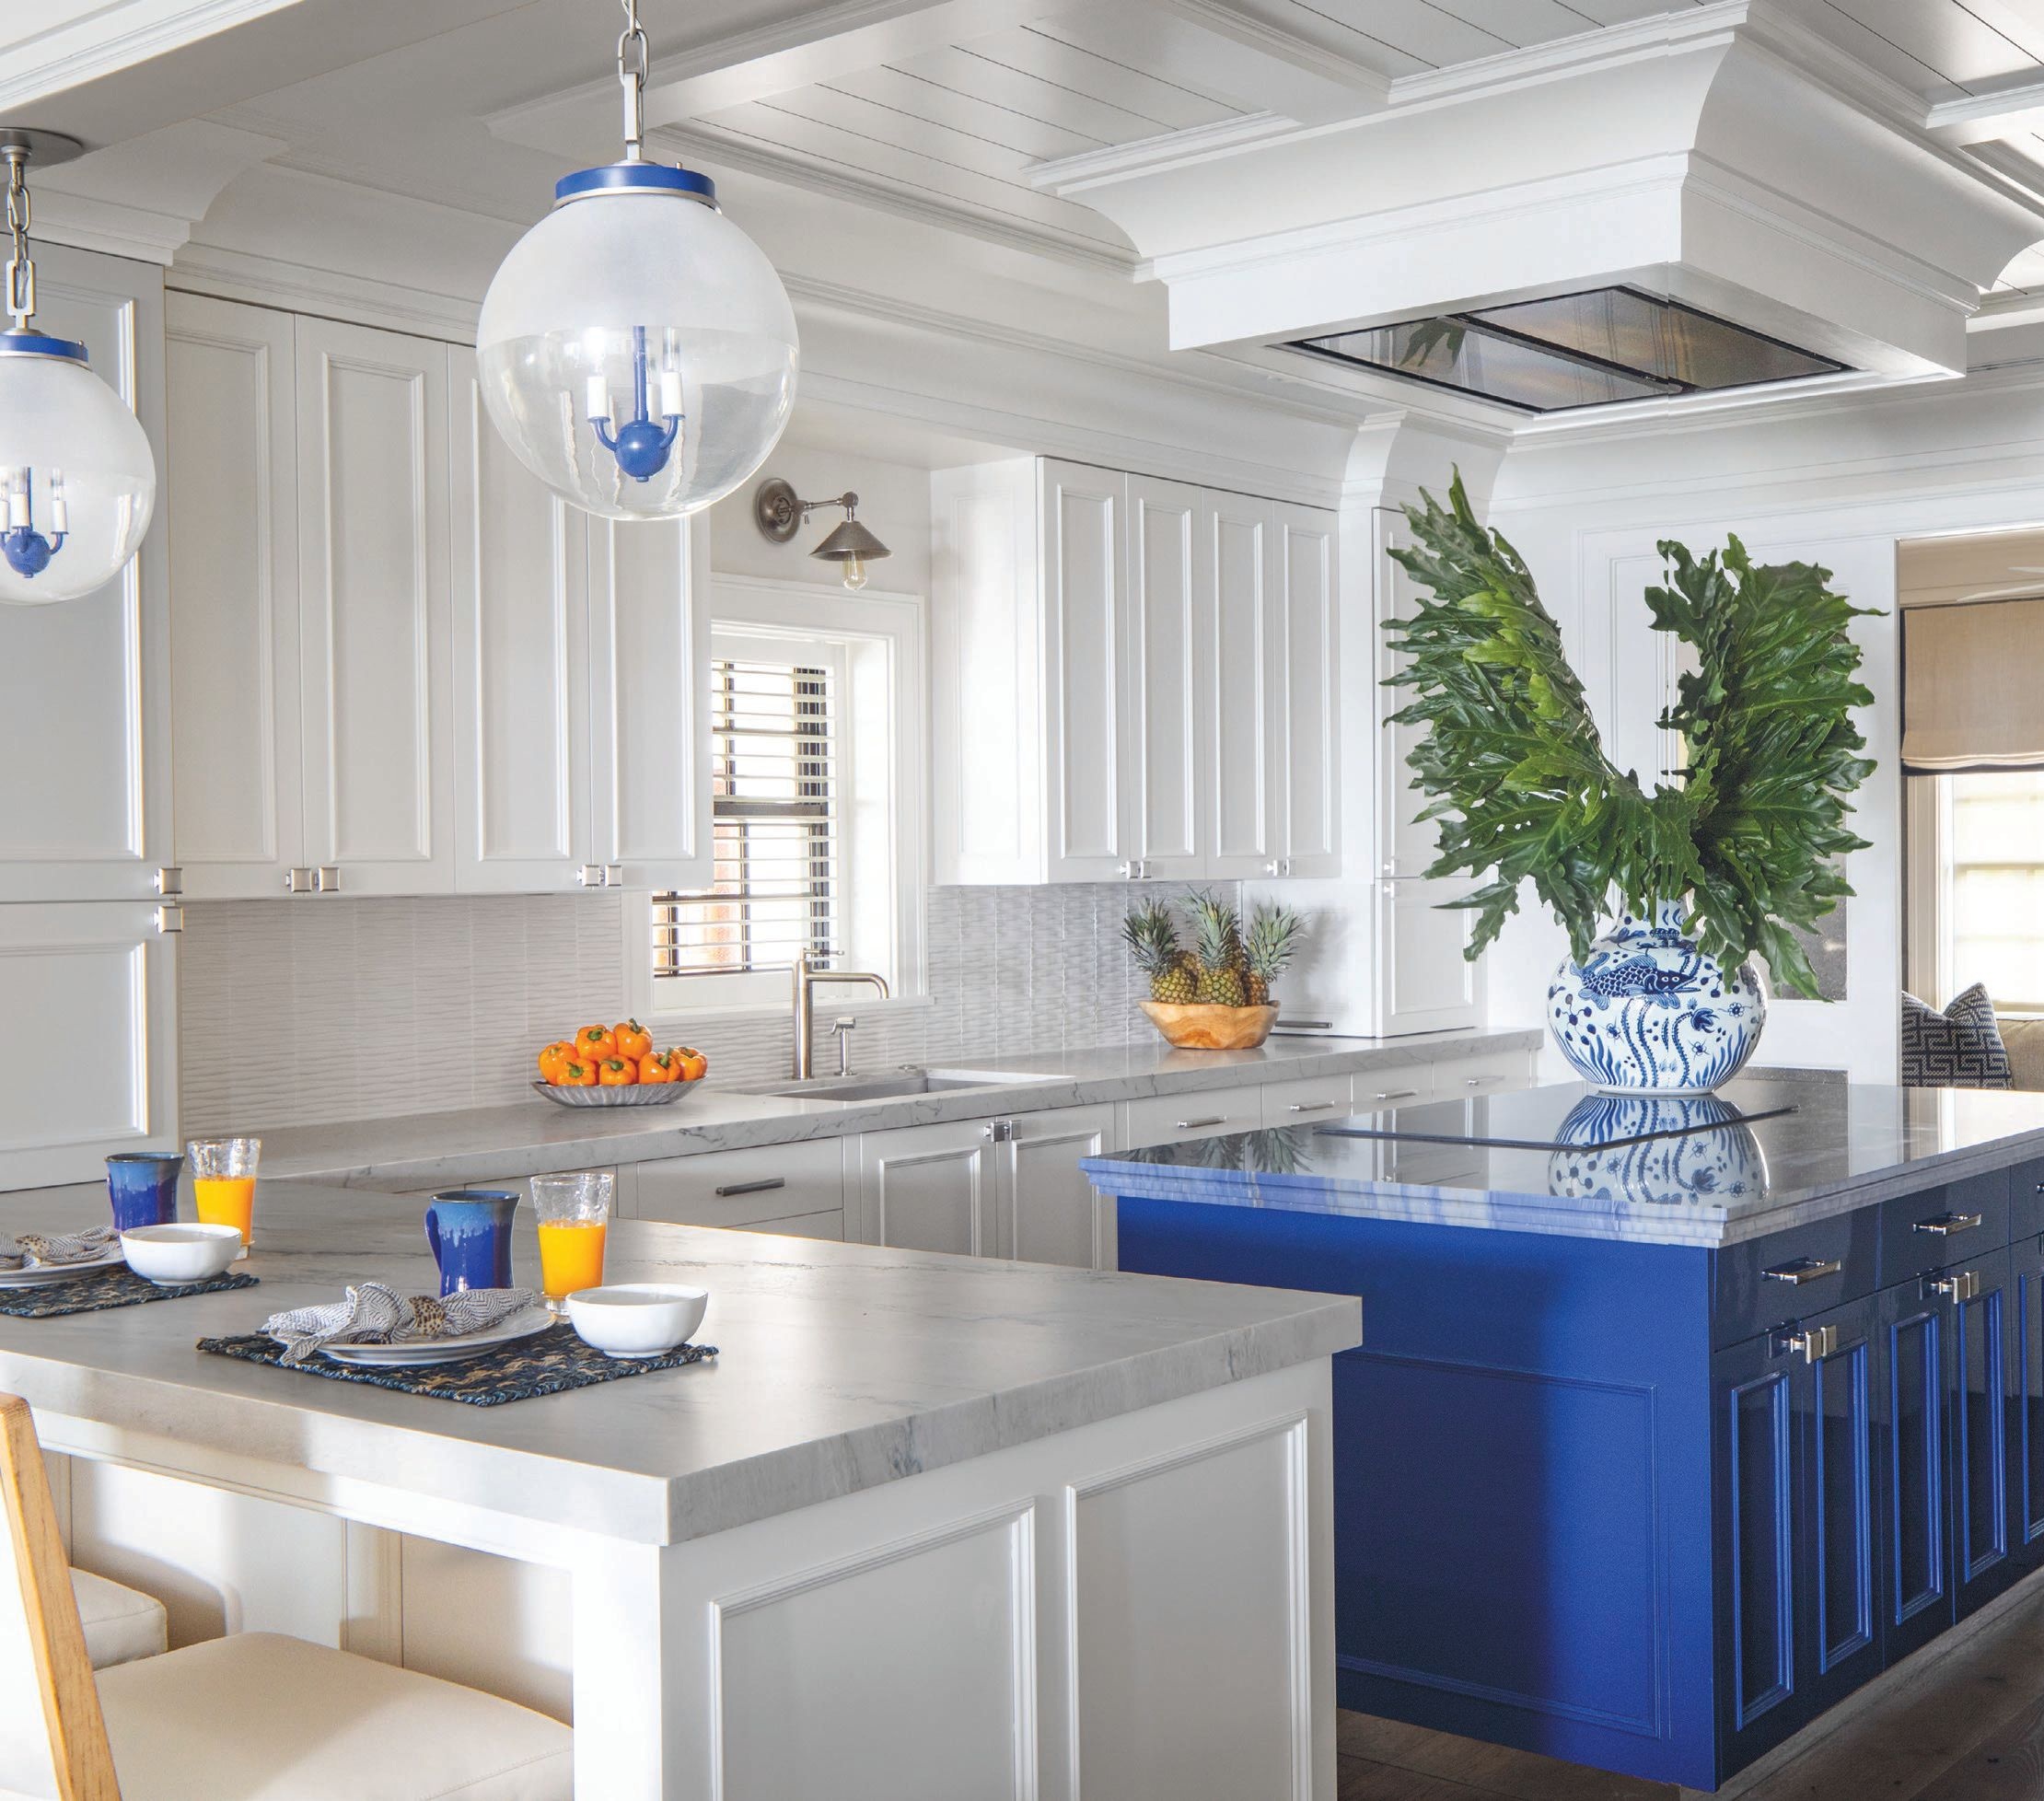 Urban Electric & Co. pendants take their blue cues from the vibrant island in the kitchen, painted in a high-gloss indigo from Sherwin-Williams Photographed by Wittefini